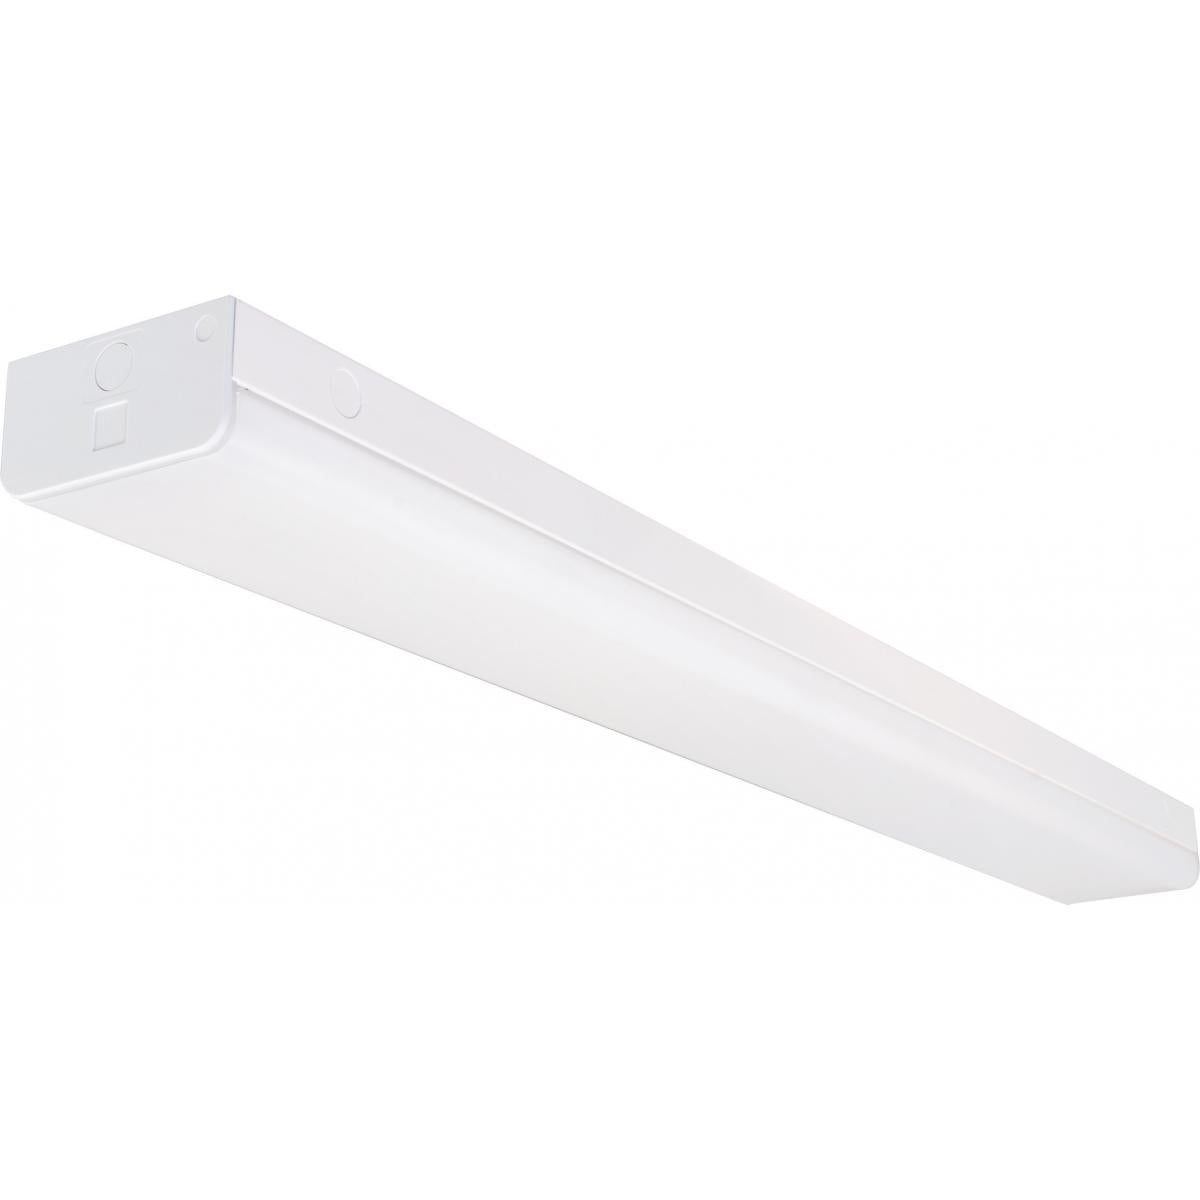 Satco 65-1143 LED 4 ft. Wide Strip Light 40W 5000K White Finish with Knockout and Sensor